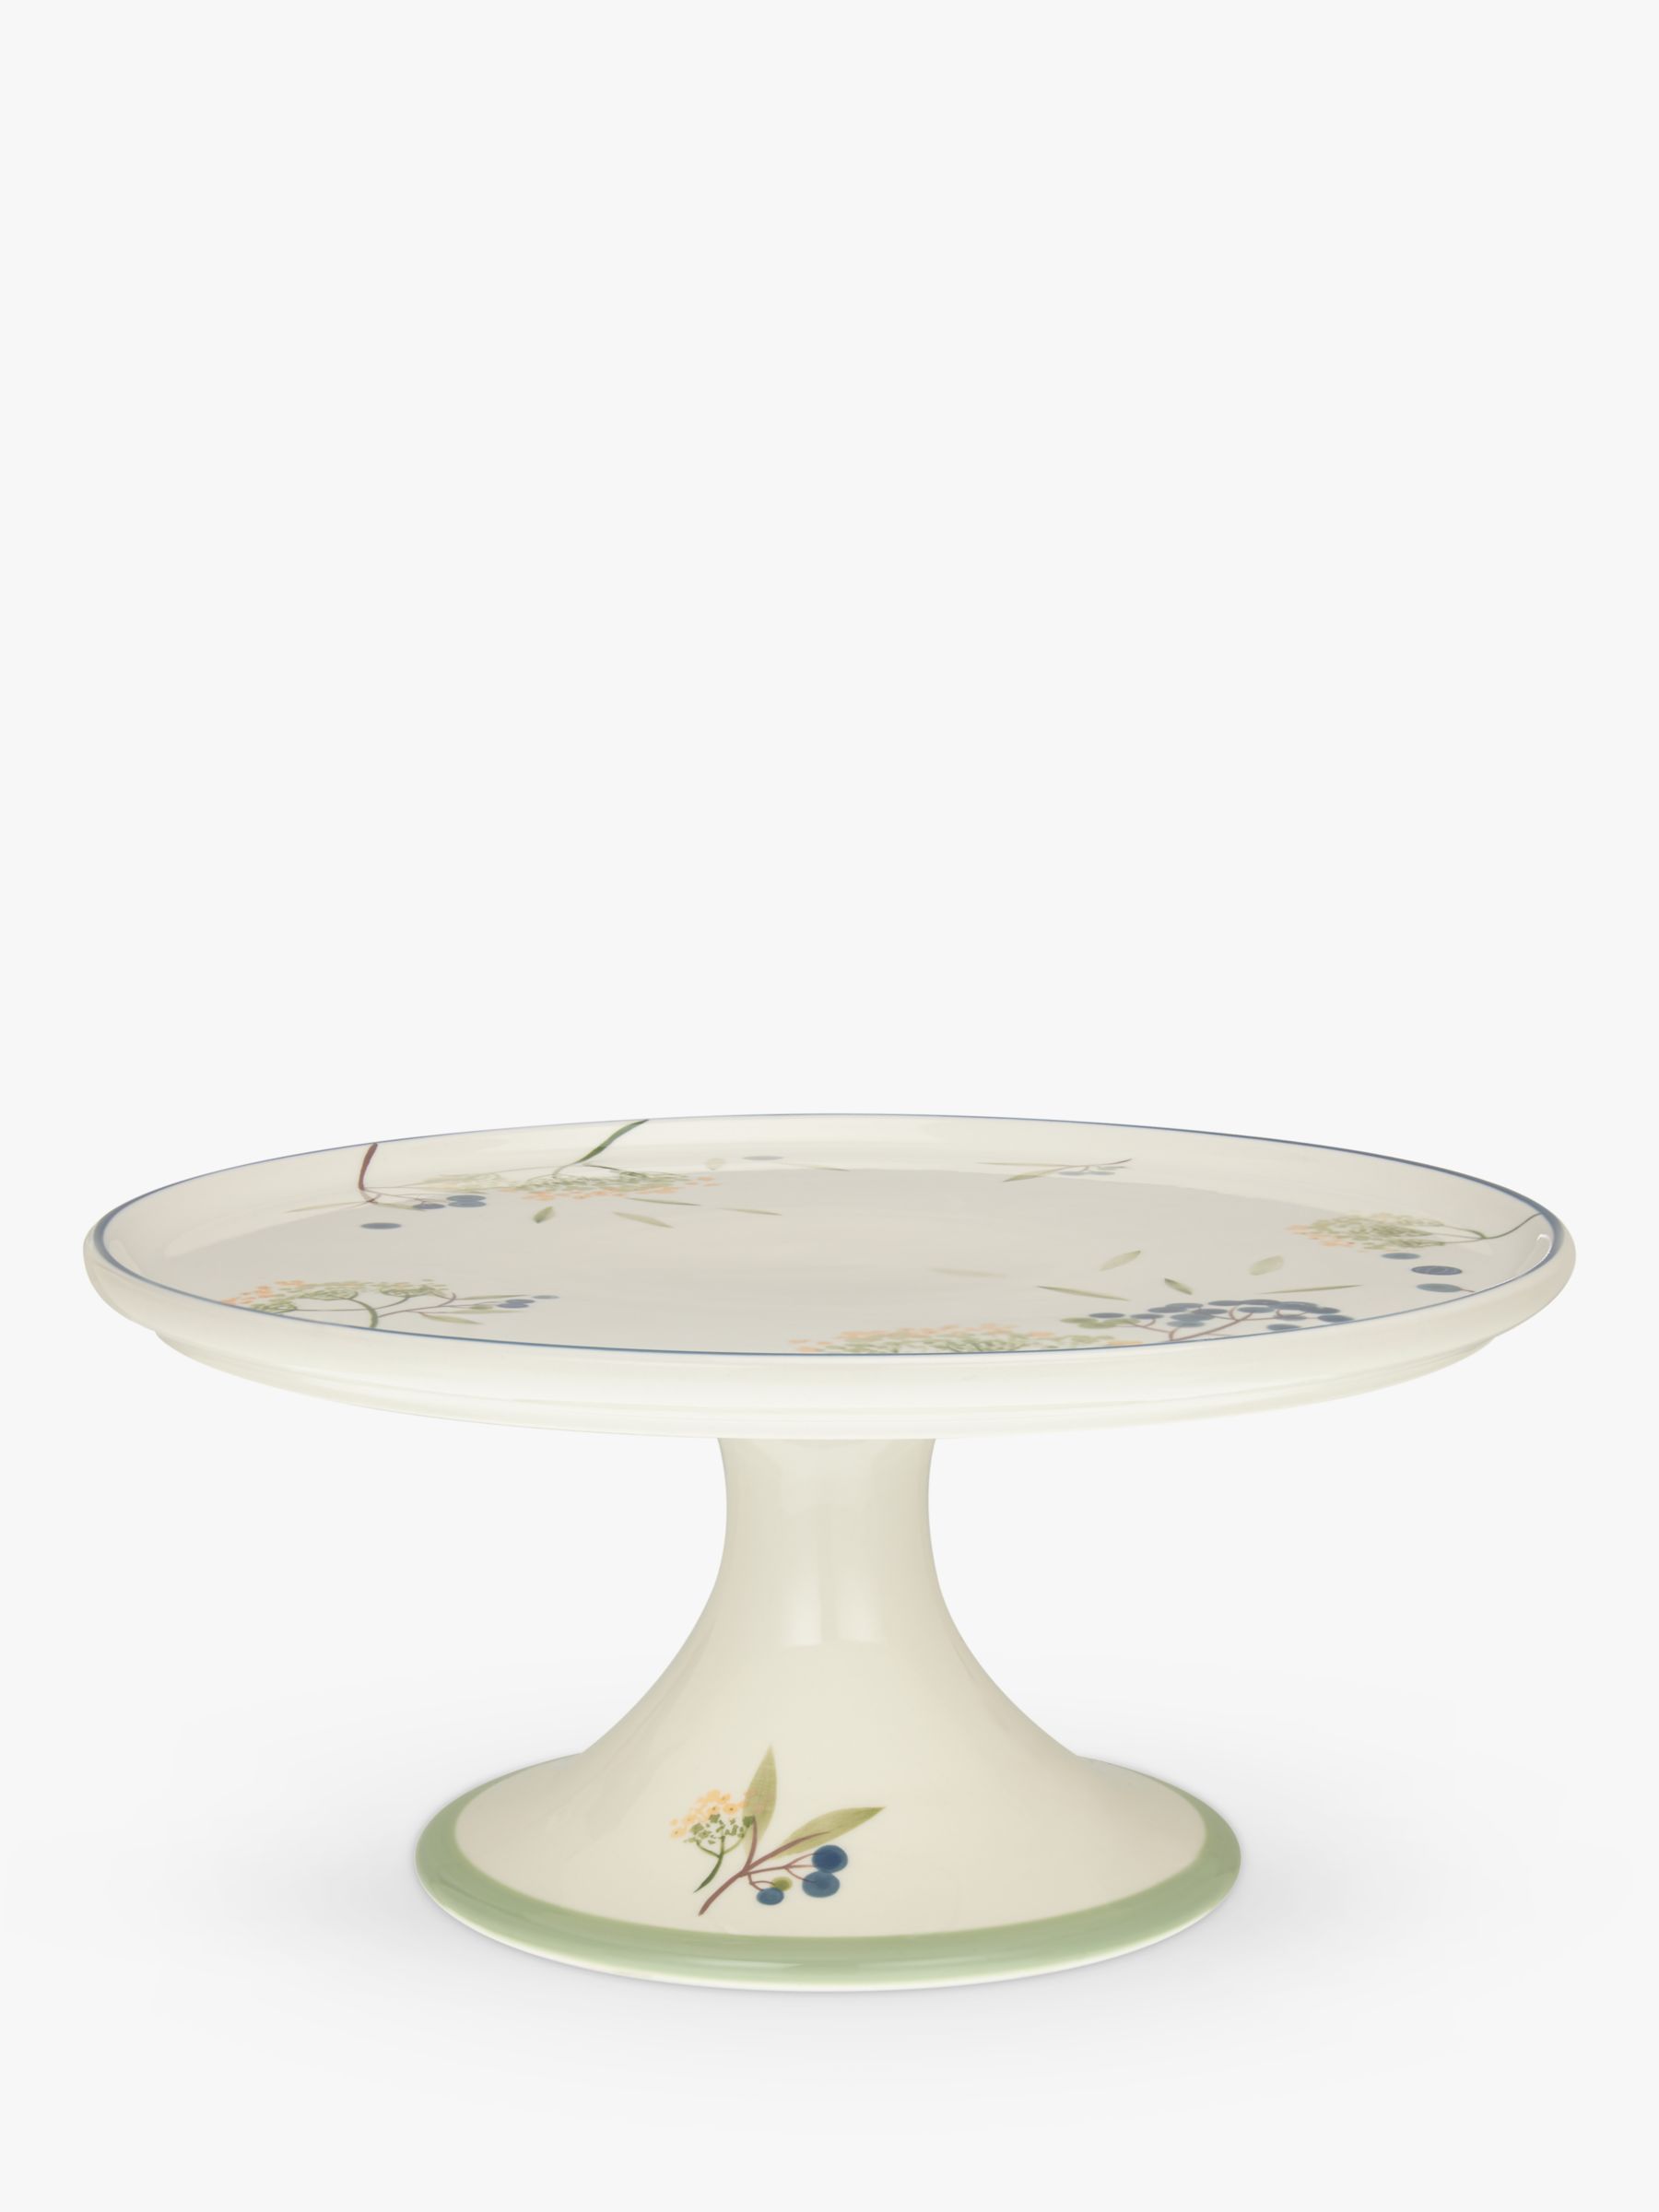  John  Lewis  Partners Hazlemere Flower Footed Cake  Stand  